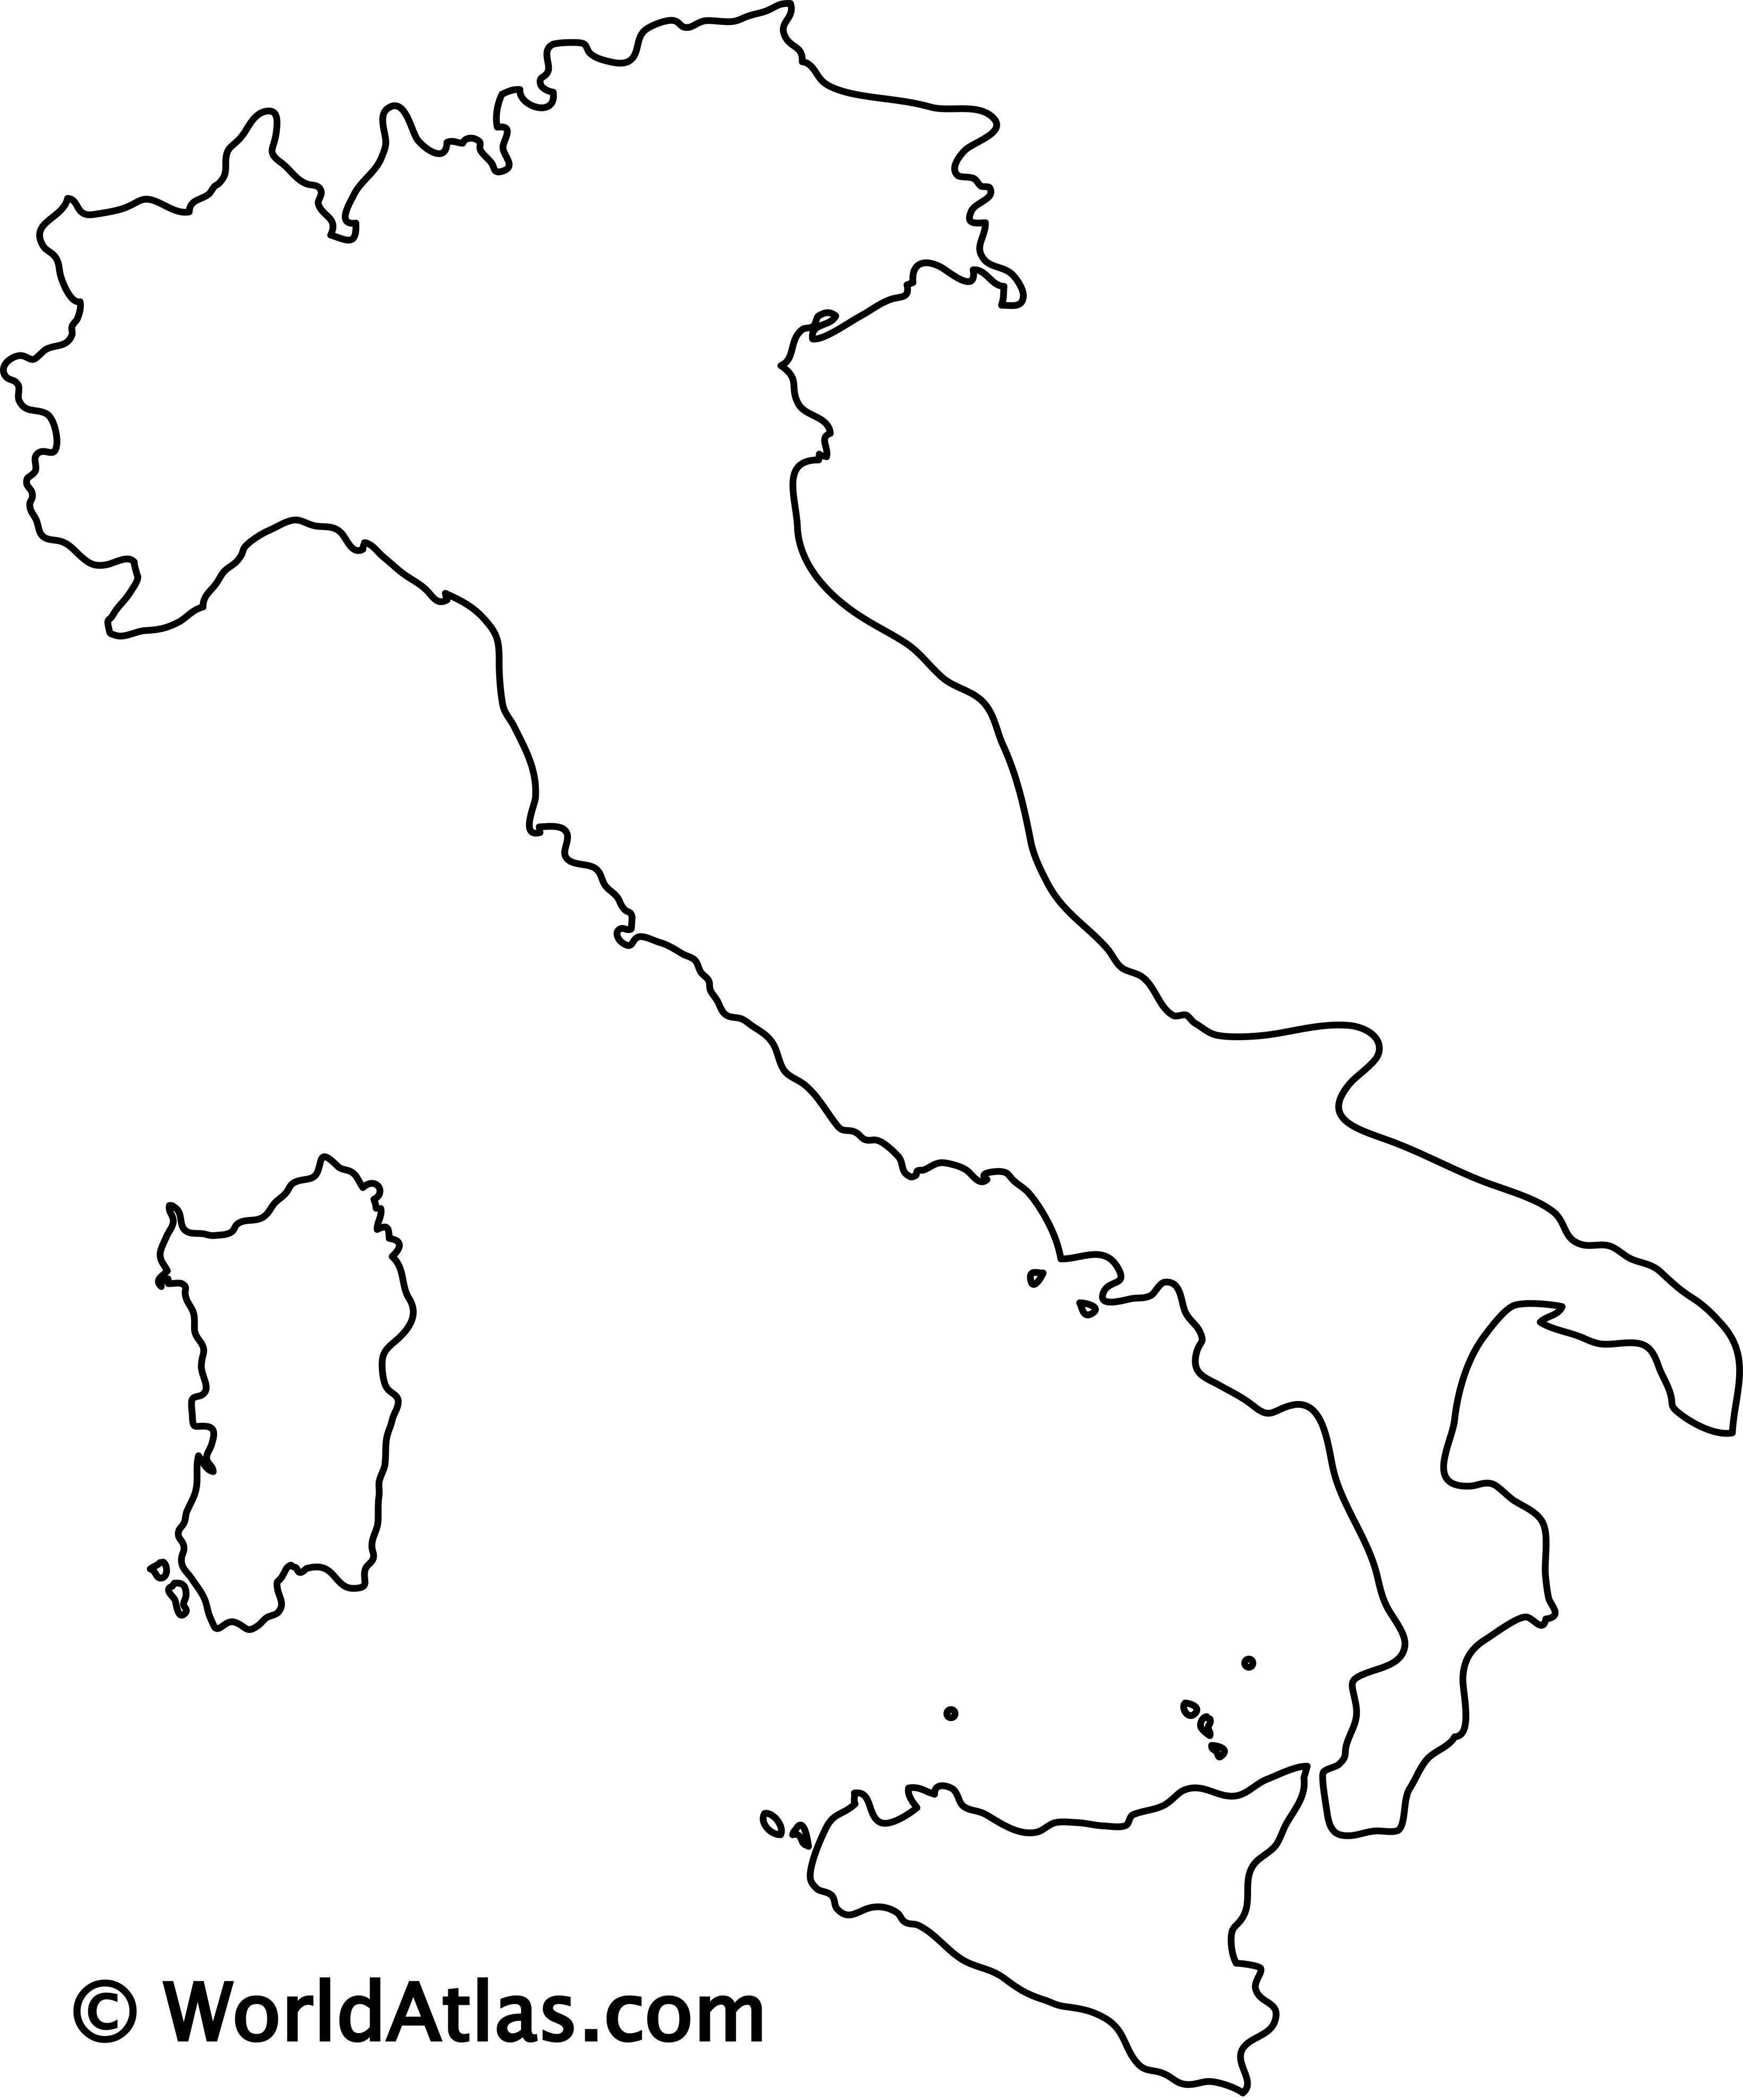 Italy Outline Map